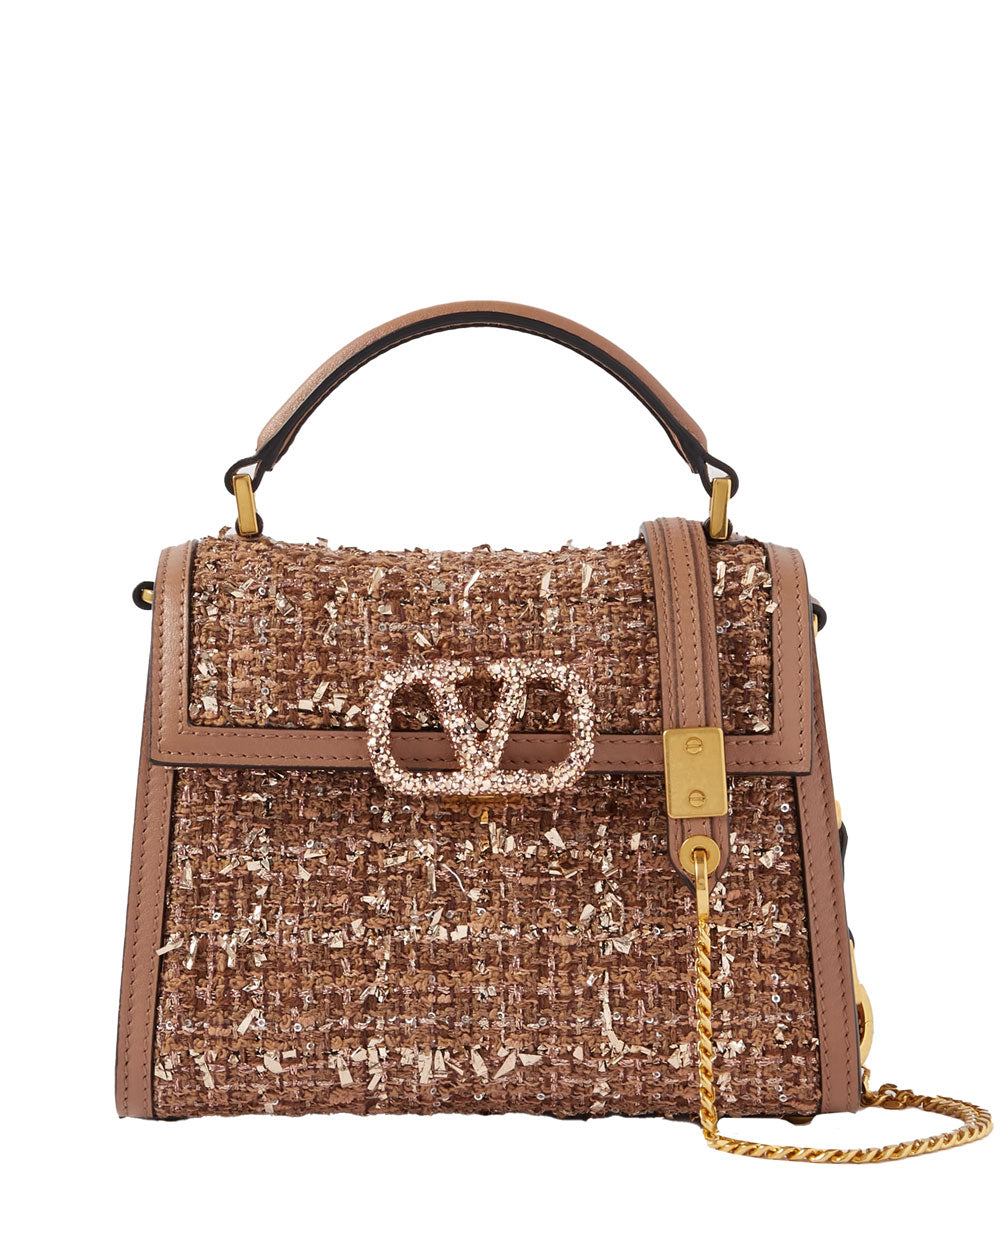 Vsling Mini Top Handle Bag in Beige and Taupe